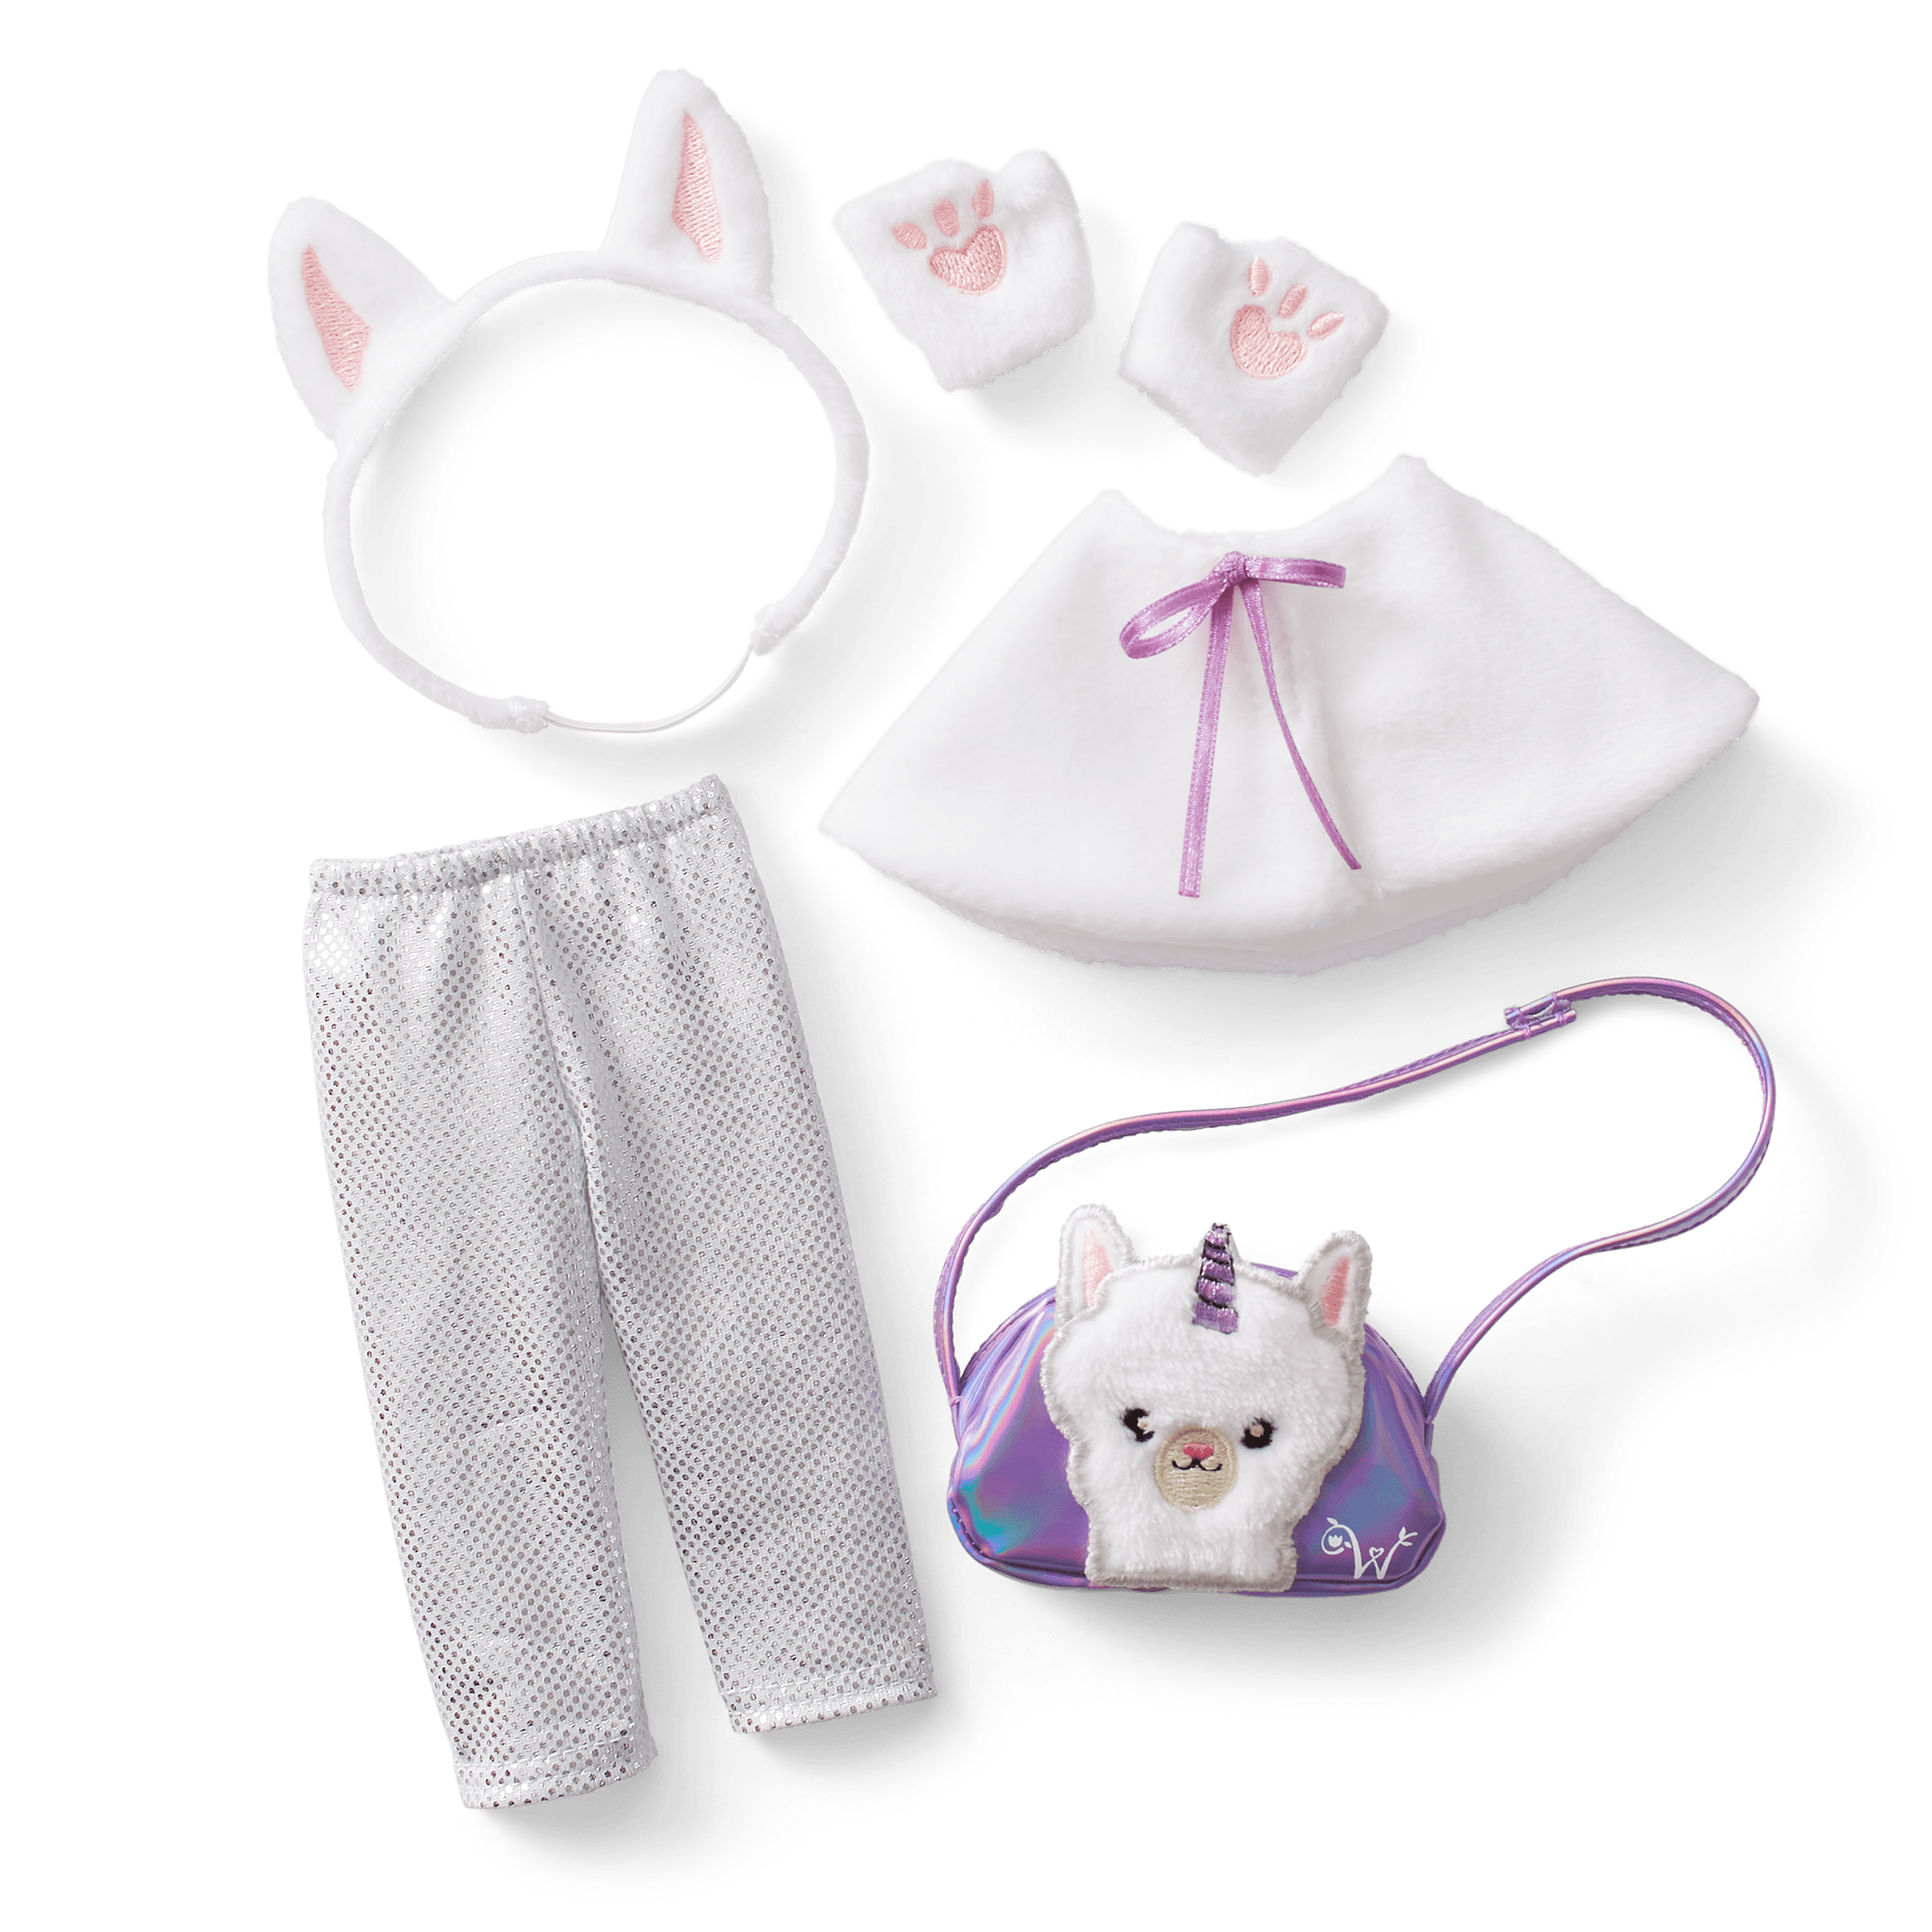 Magical Llamacorn Accessories for WellieWishers™ Dolls